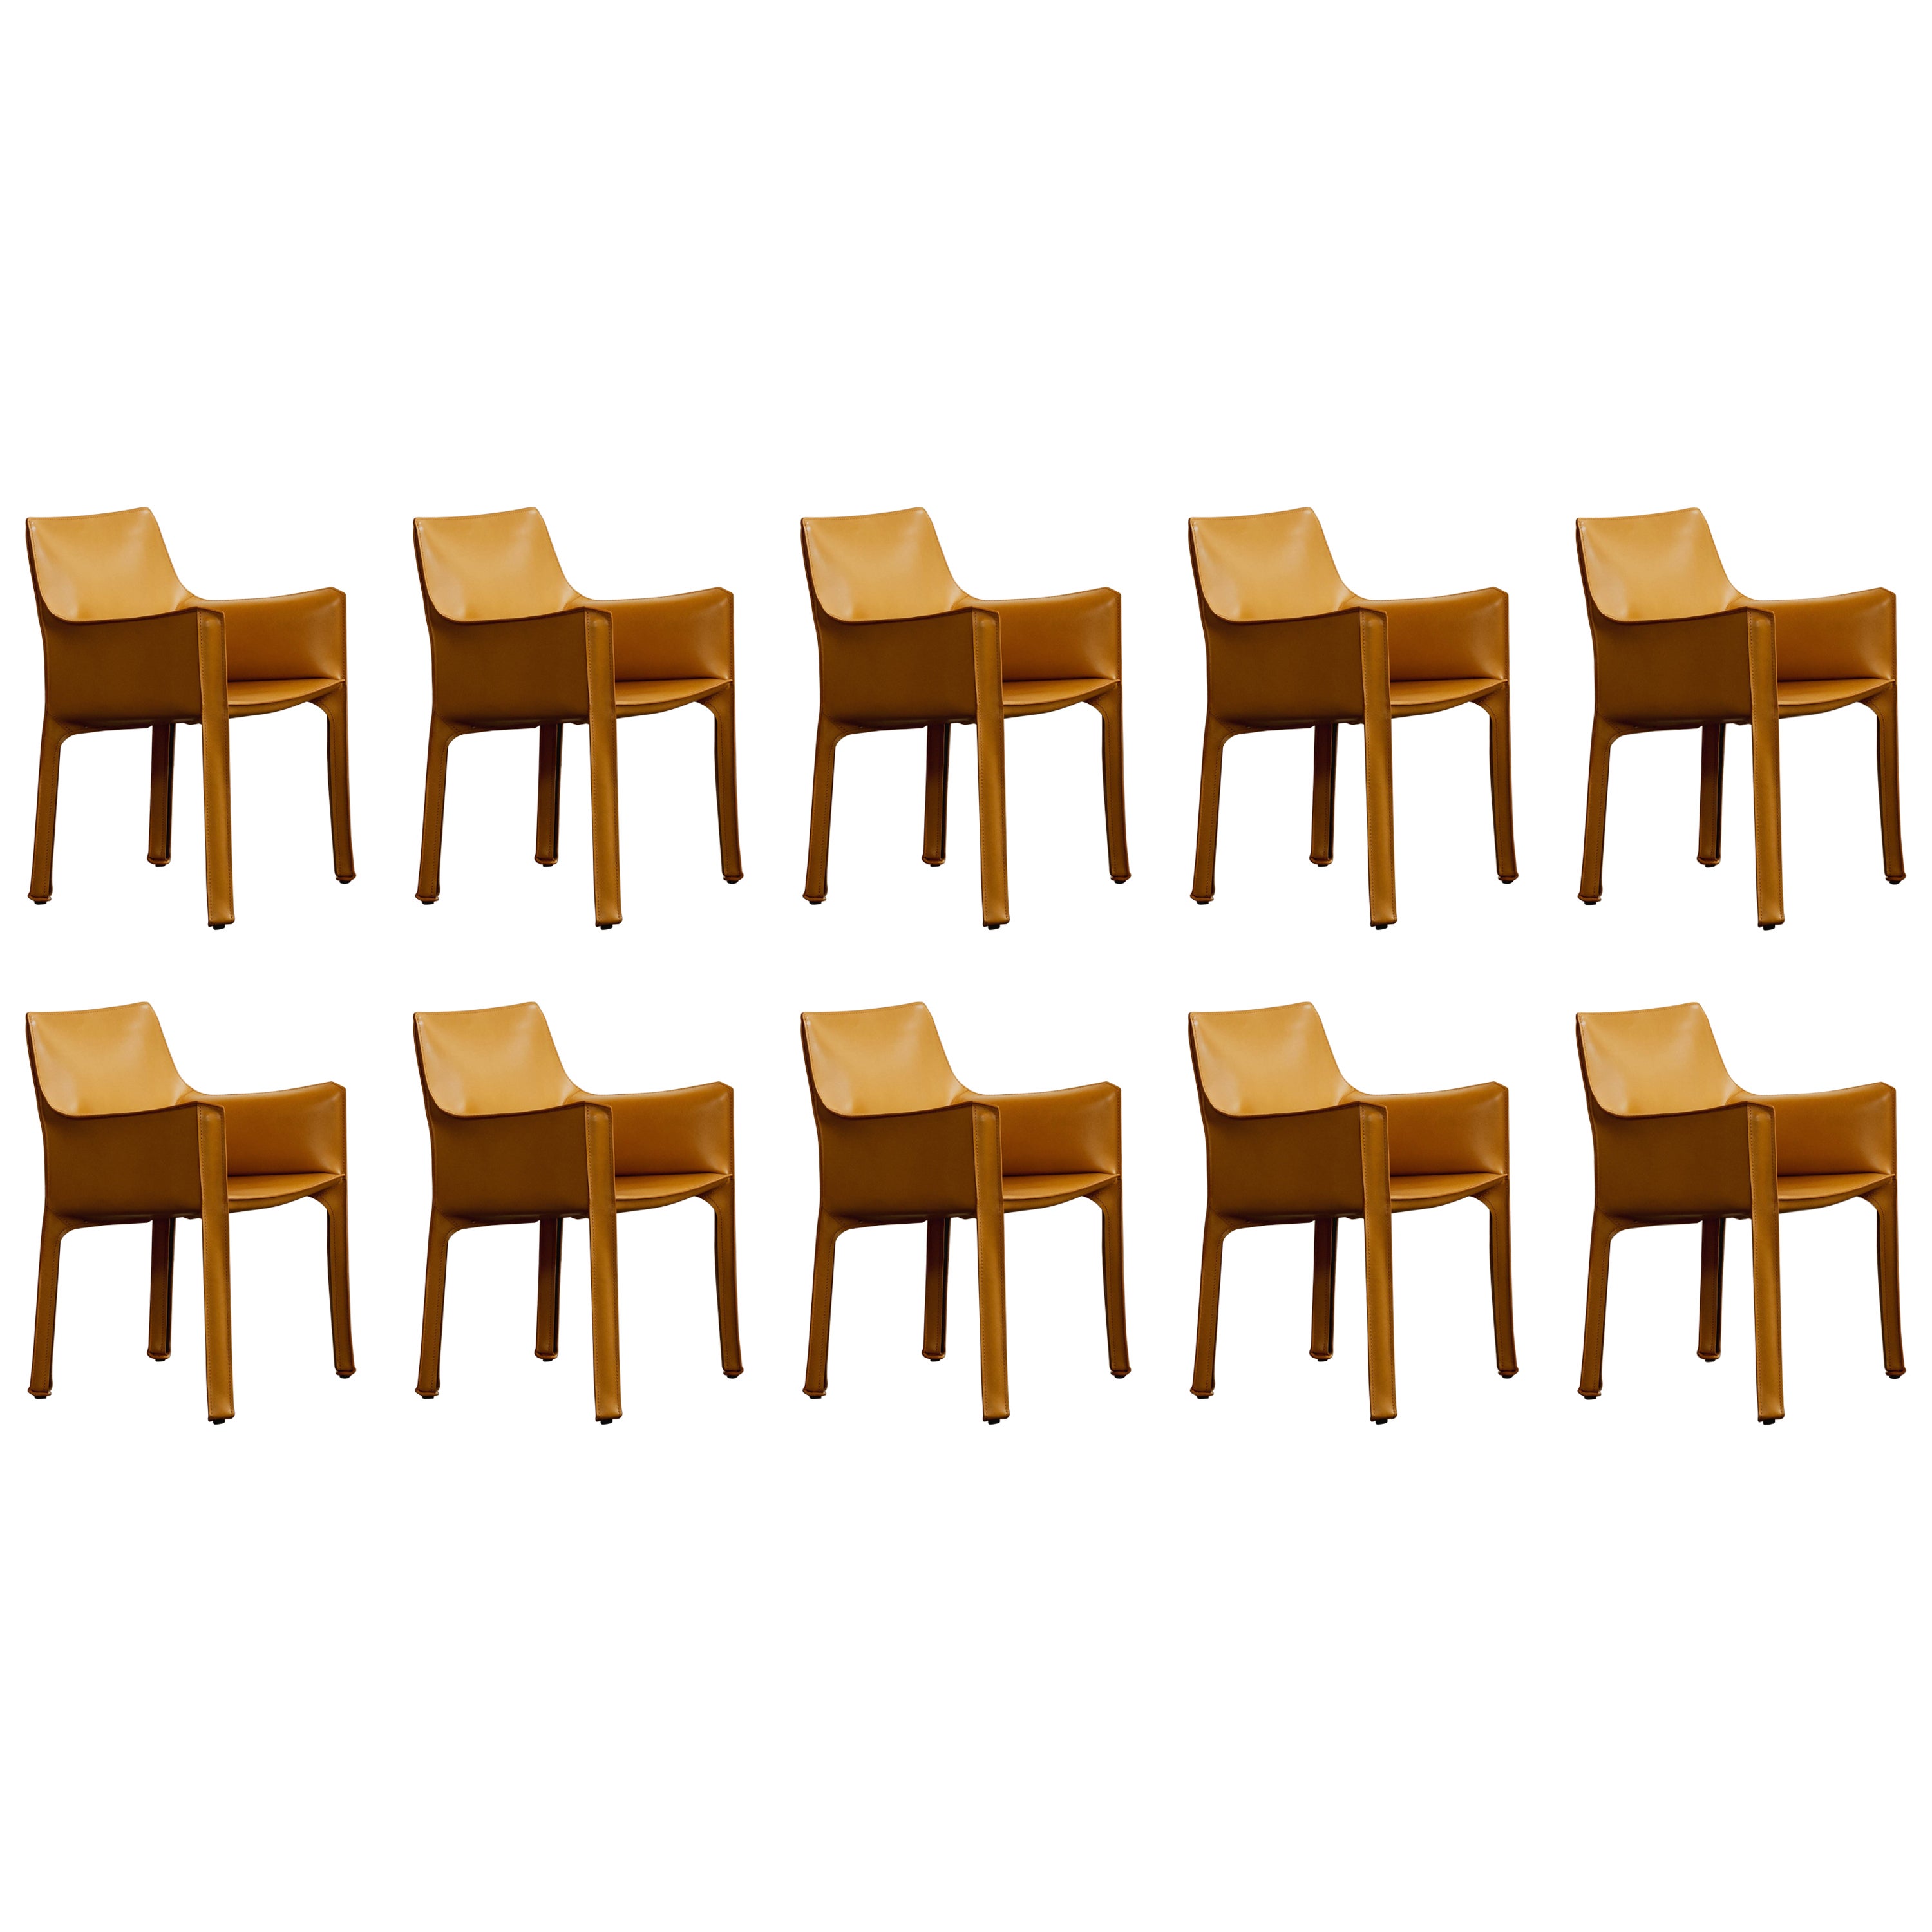 Mario Bellini "CAB 413" Chairs for Cassina in Yellow, 1977, Set of 10 For Sale